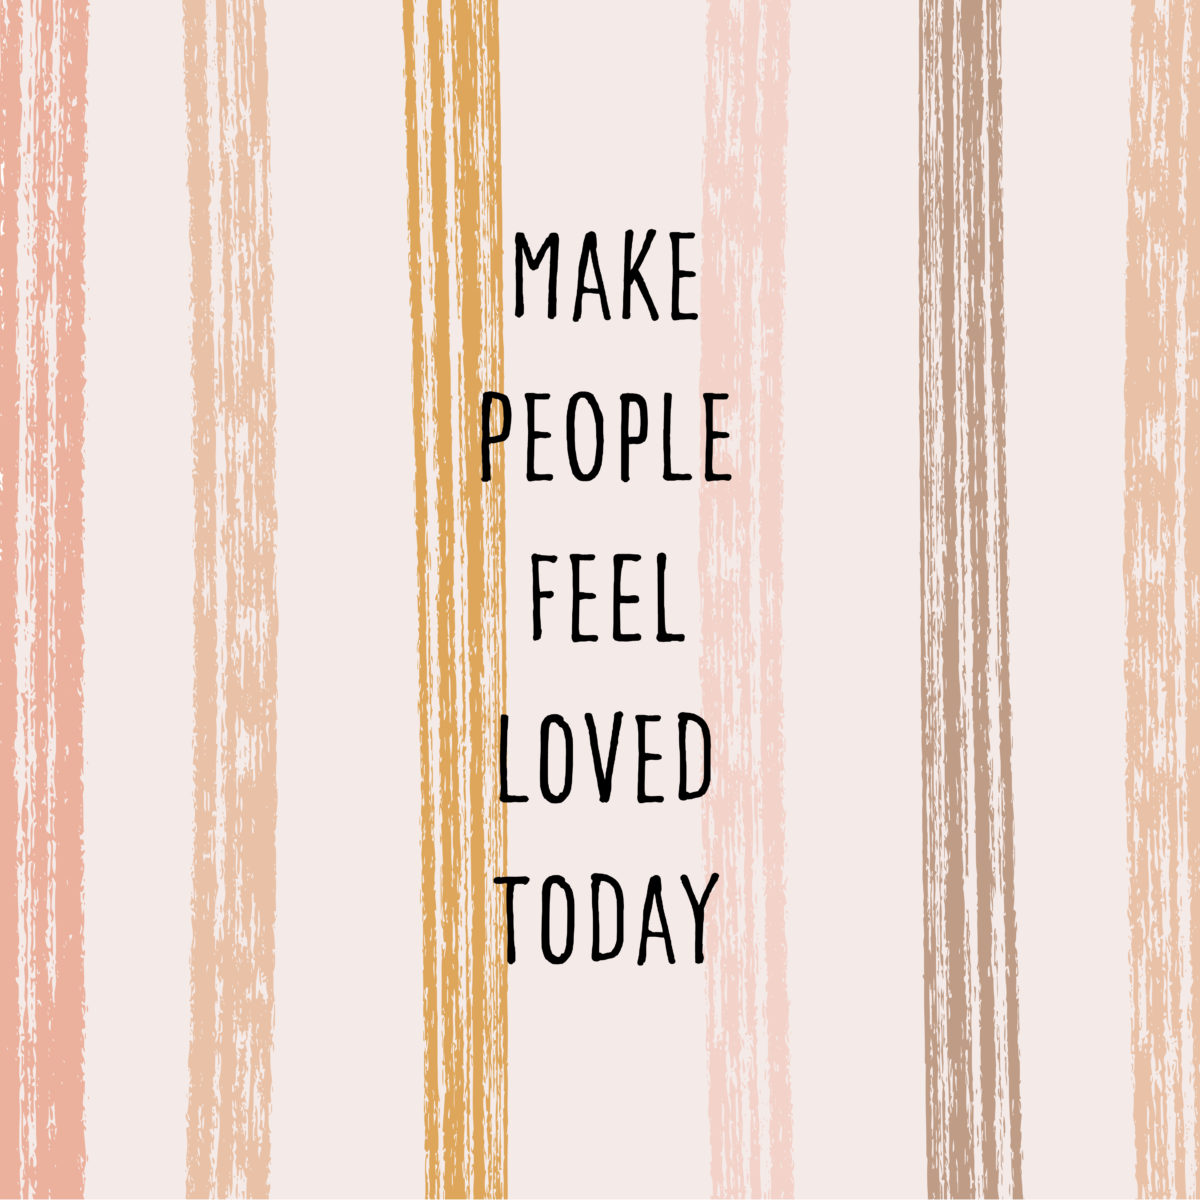 happy-friayyy + free-phone-lock-screen-inspirational-quote-make-people-feel-loved-today